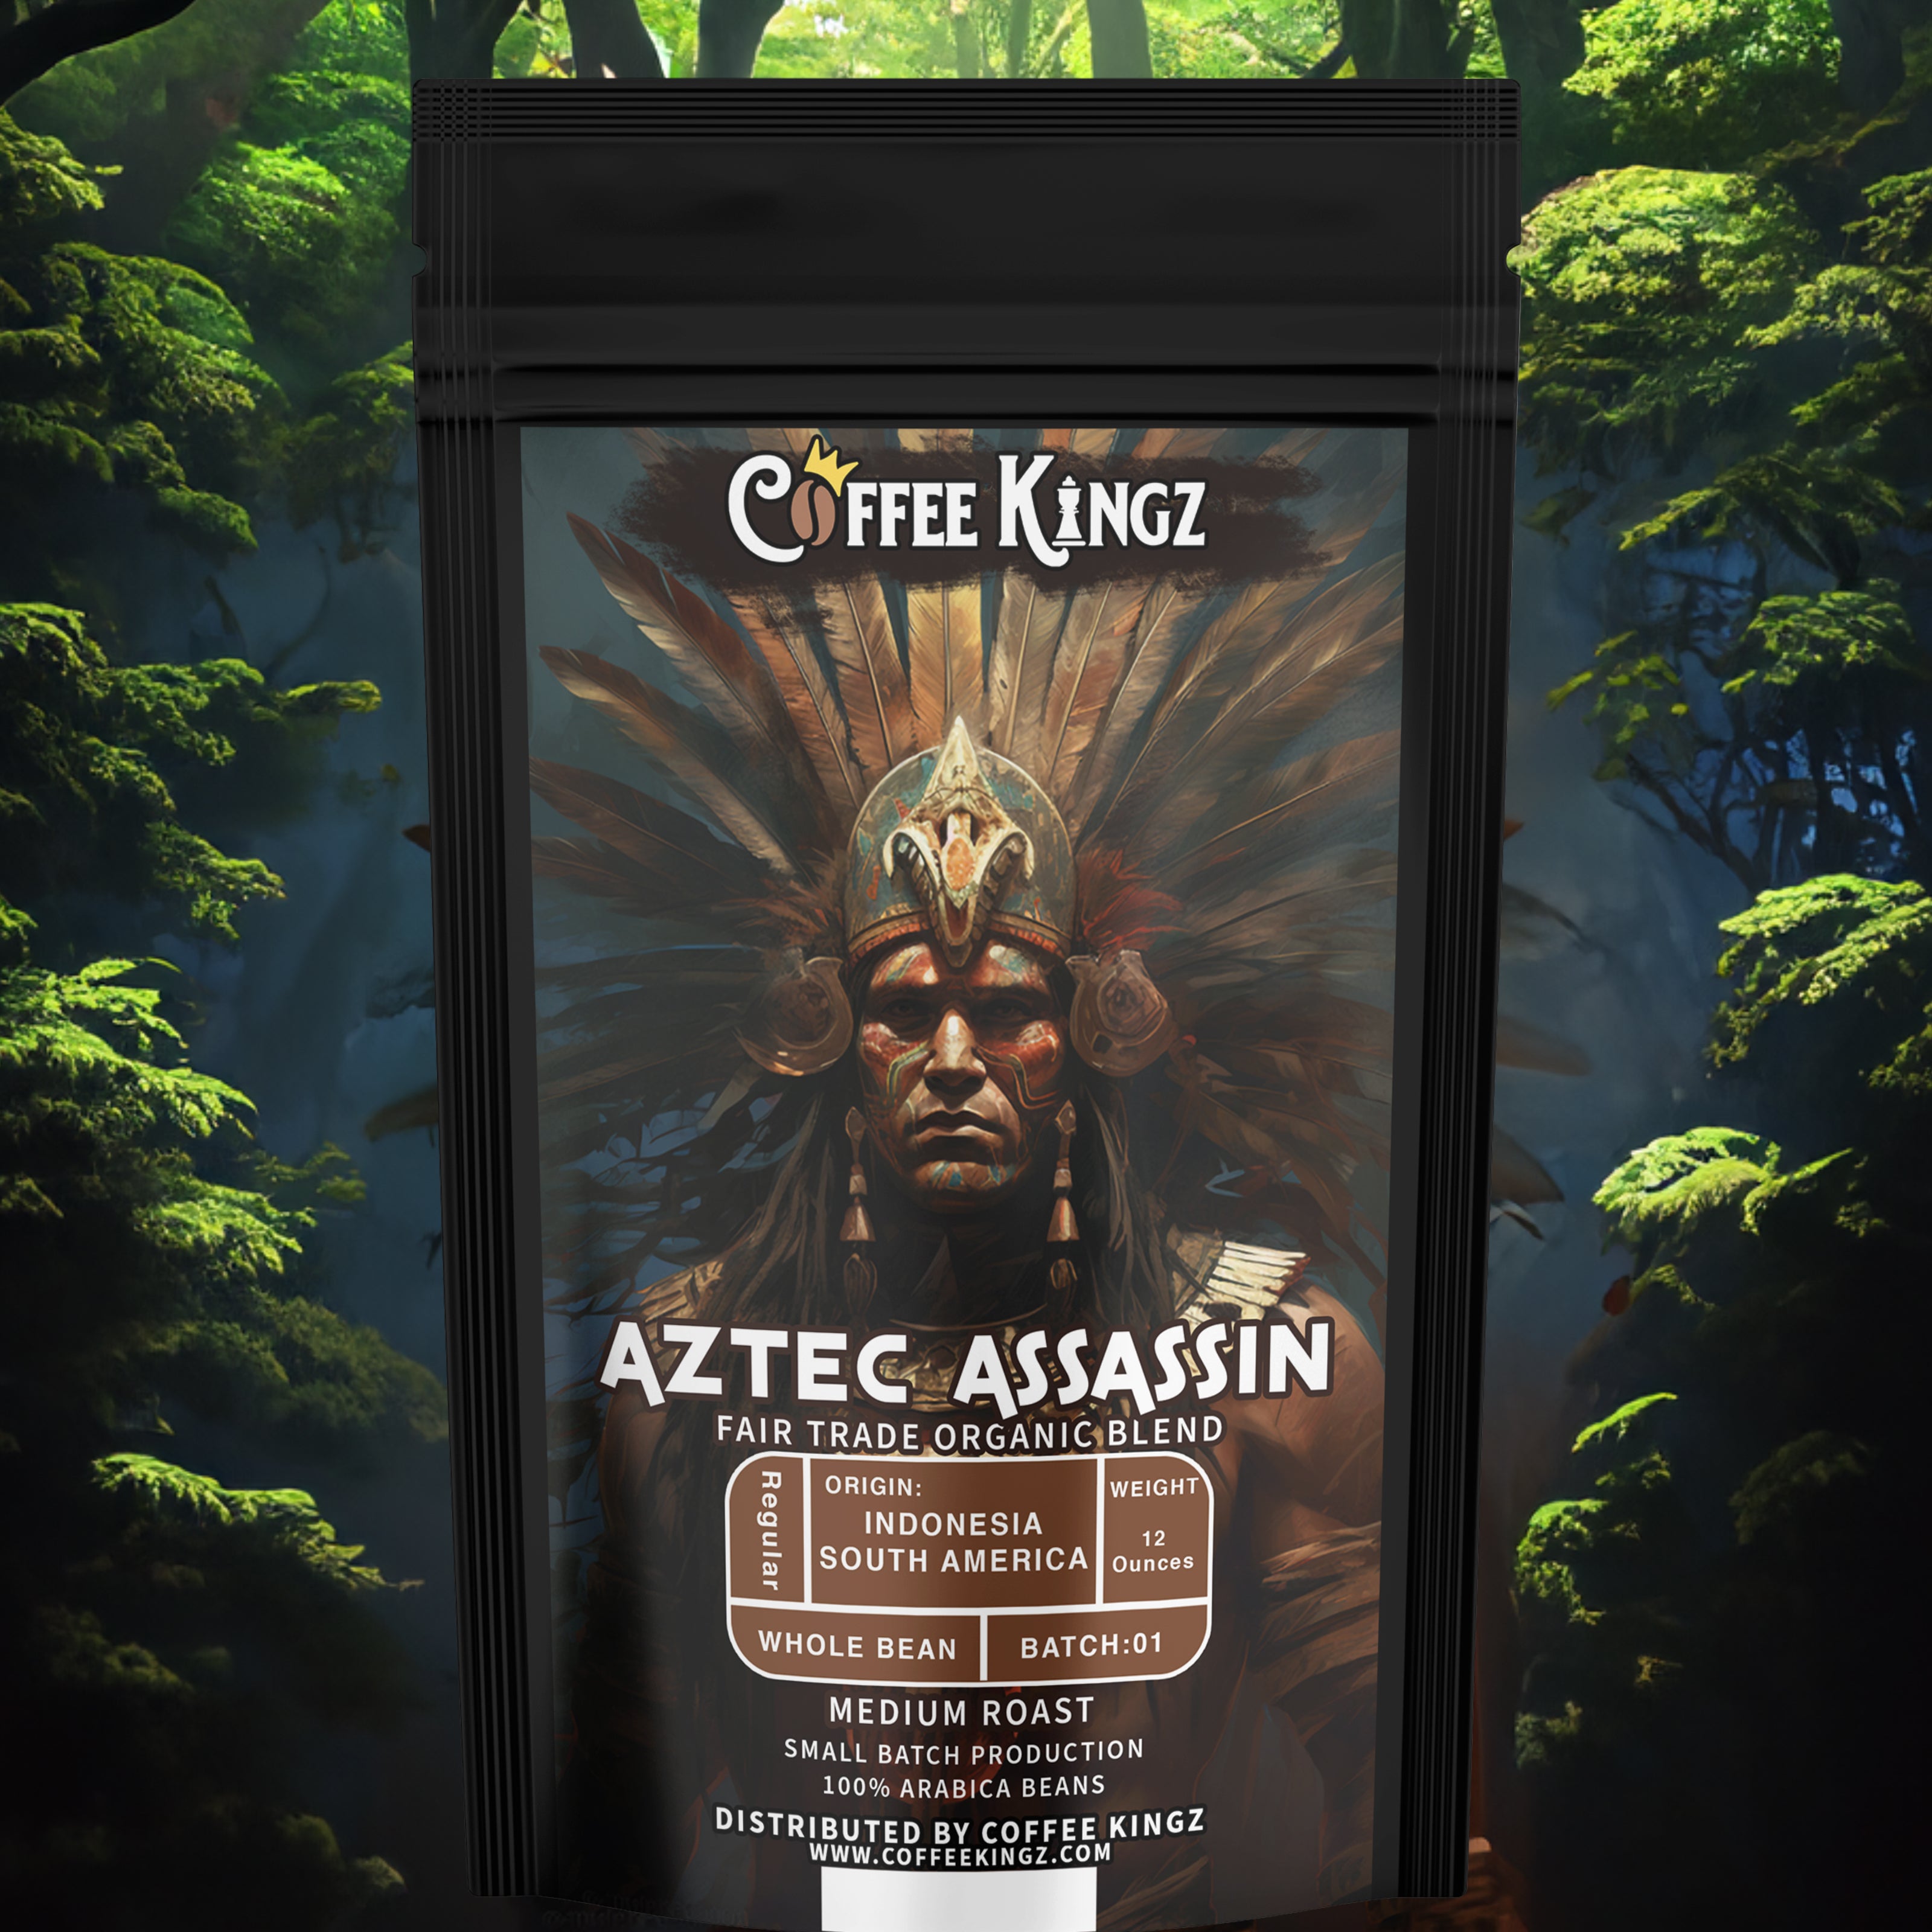 "Fair trade organic coffee beans with Aztec assassinWhole bean fair trade organic coffee, medium roas